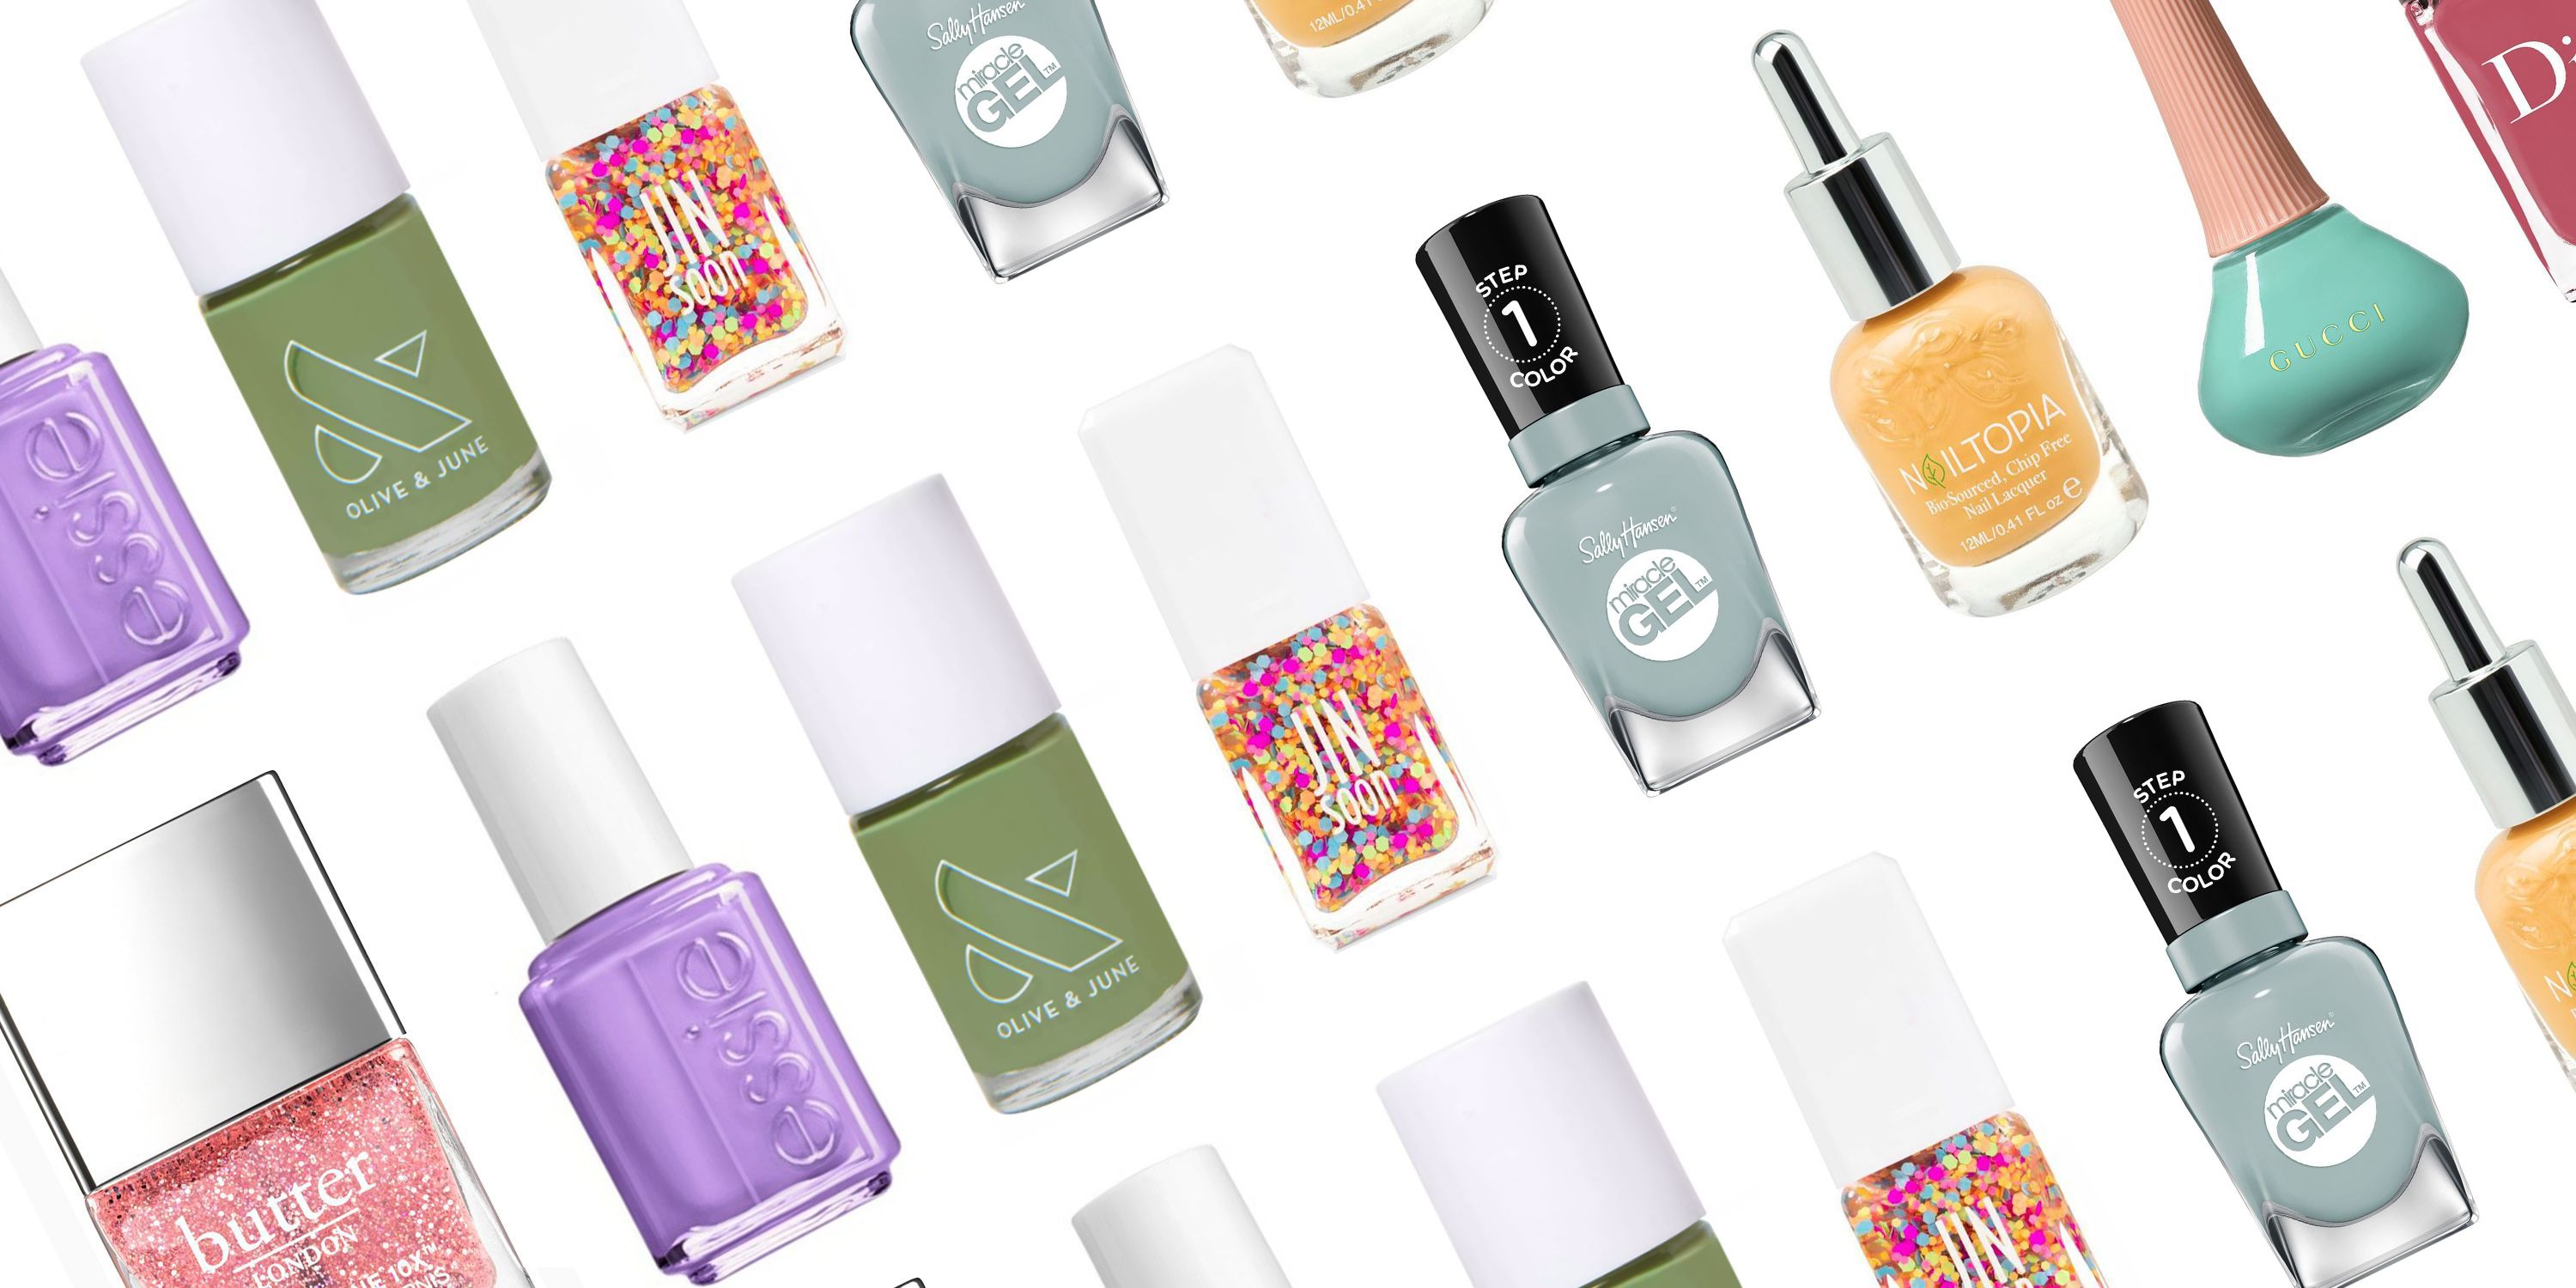 Best Nail Polish Brushes for Top 10 Tuesday : All Lacquered Up